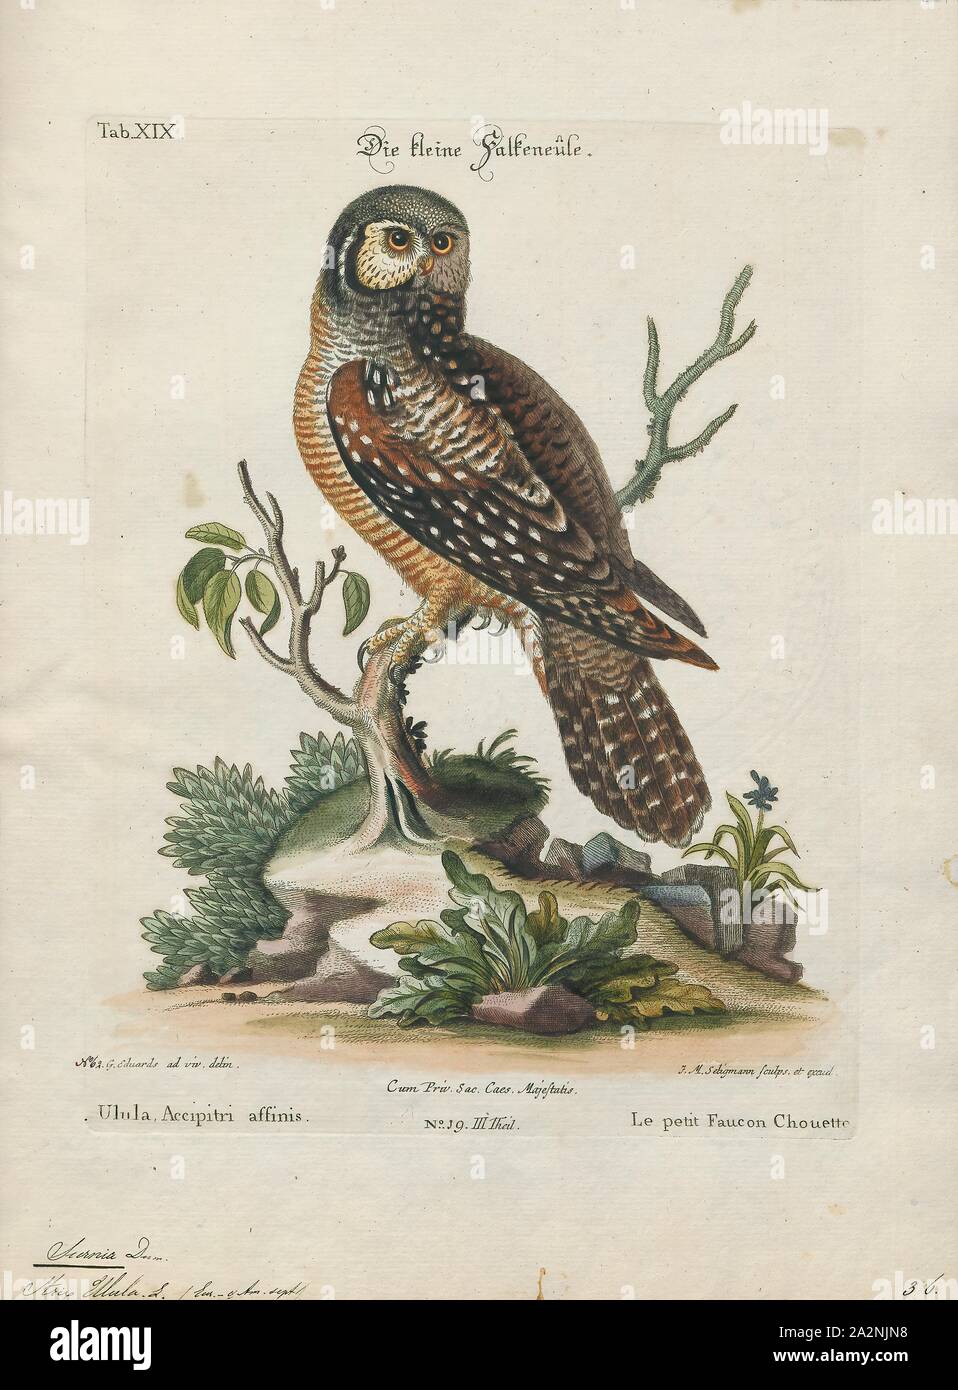 Surnia ulula, Print, The northern hawk-owl (Surnia ulula) is a medium sized true owl of the northern latitudes. It is non-migratory and usually stays within its breeding range, though it sometimes irrupts southward. It is one of the few owls that is neither nocturnal nor crepuscular, being active only during the day. This is the only living species in the genus Surnia of the family Strigidae, the "typical" owls (as opposed to barn owls, Tytonidae). The species is sometimes called simply the hawk owl; however, many species of owls in the genus Ninox are also called "hawk owls"., 1700-1880 Stock Photo